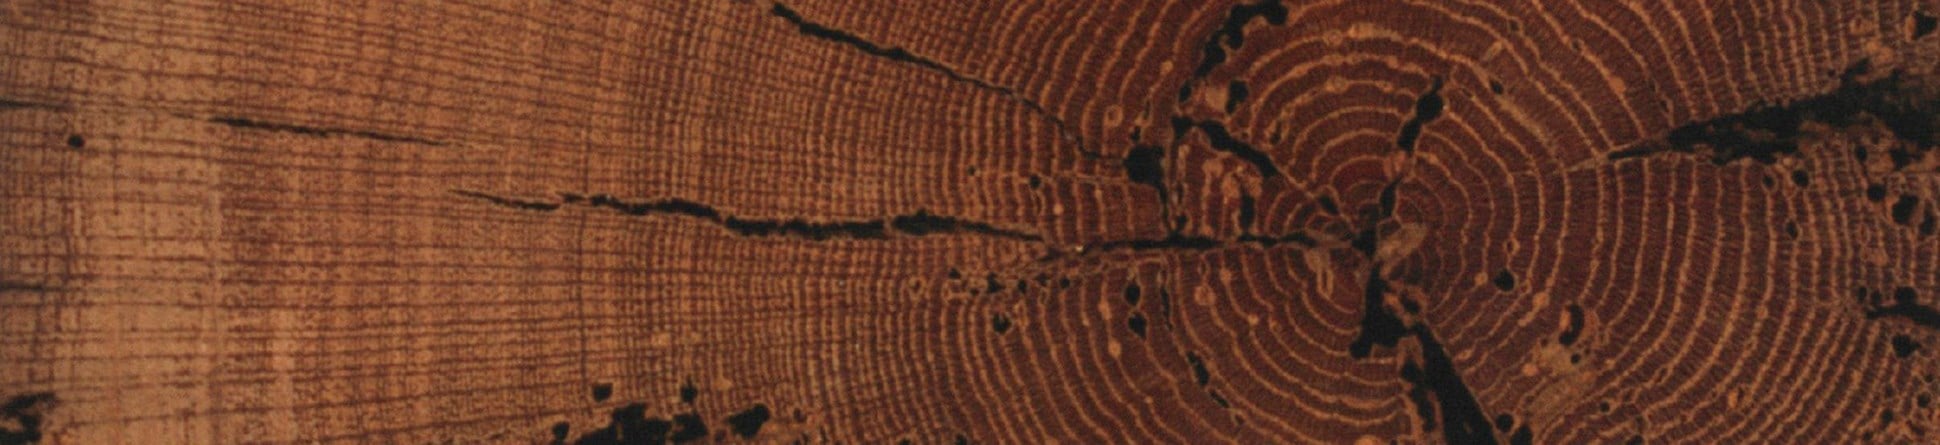 Photograph of tree trunk cross-section